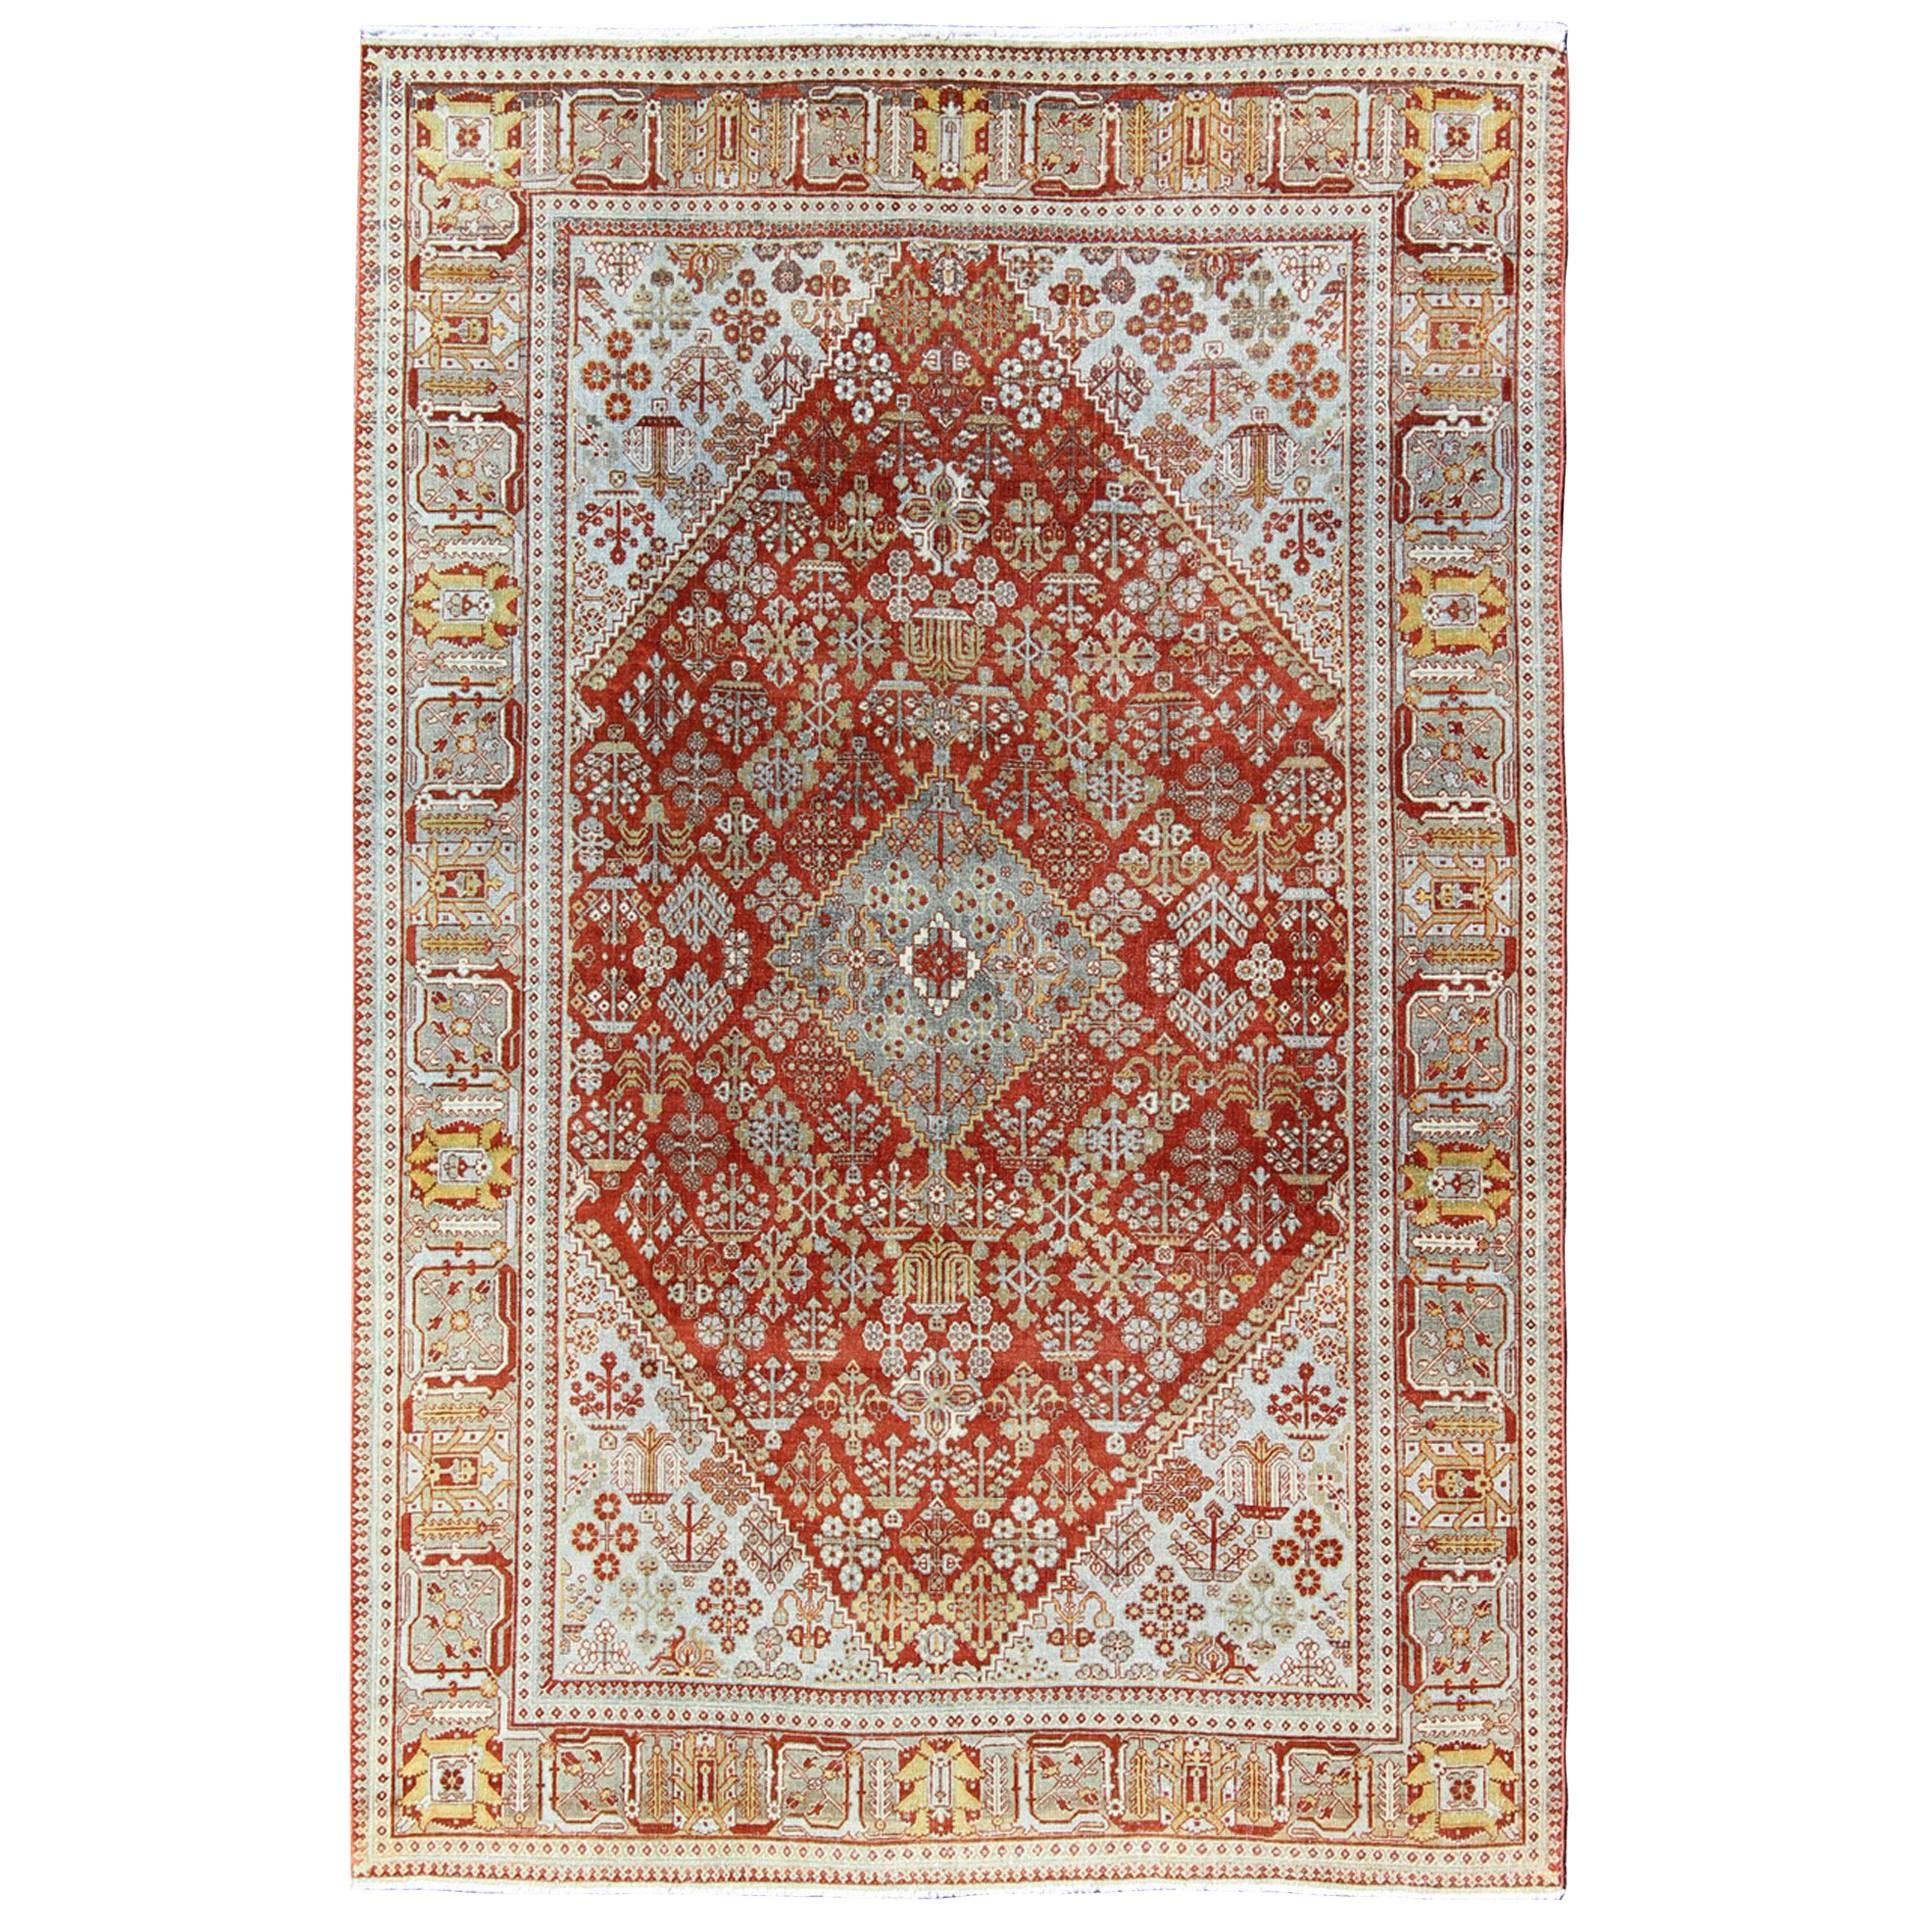 Antique Persian Joshegan Rug with Geometric Medallion Design in Rust and Ivory